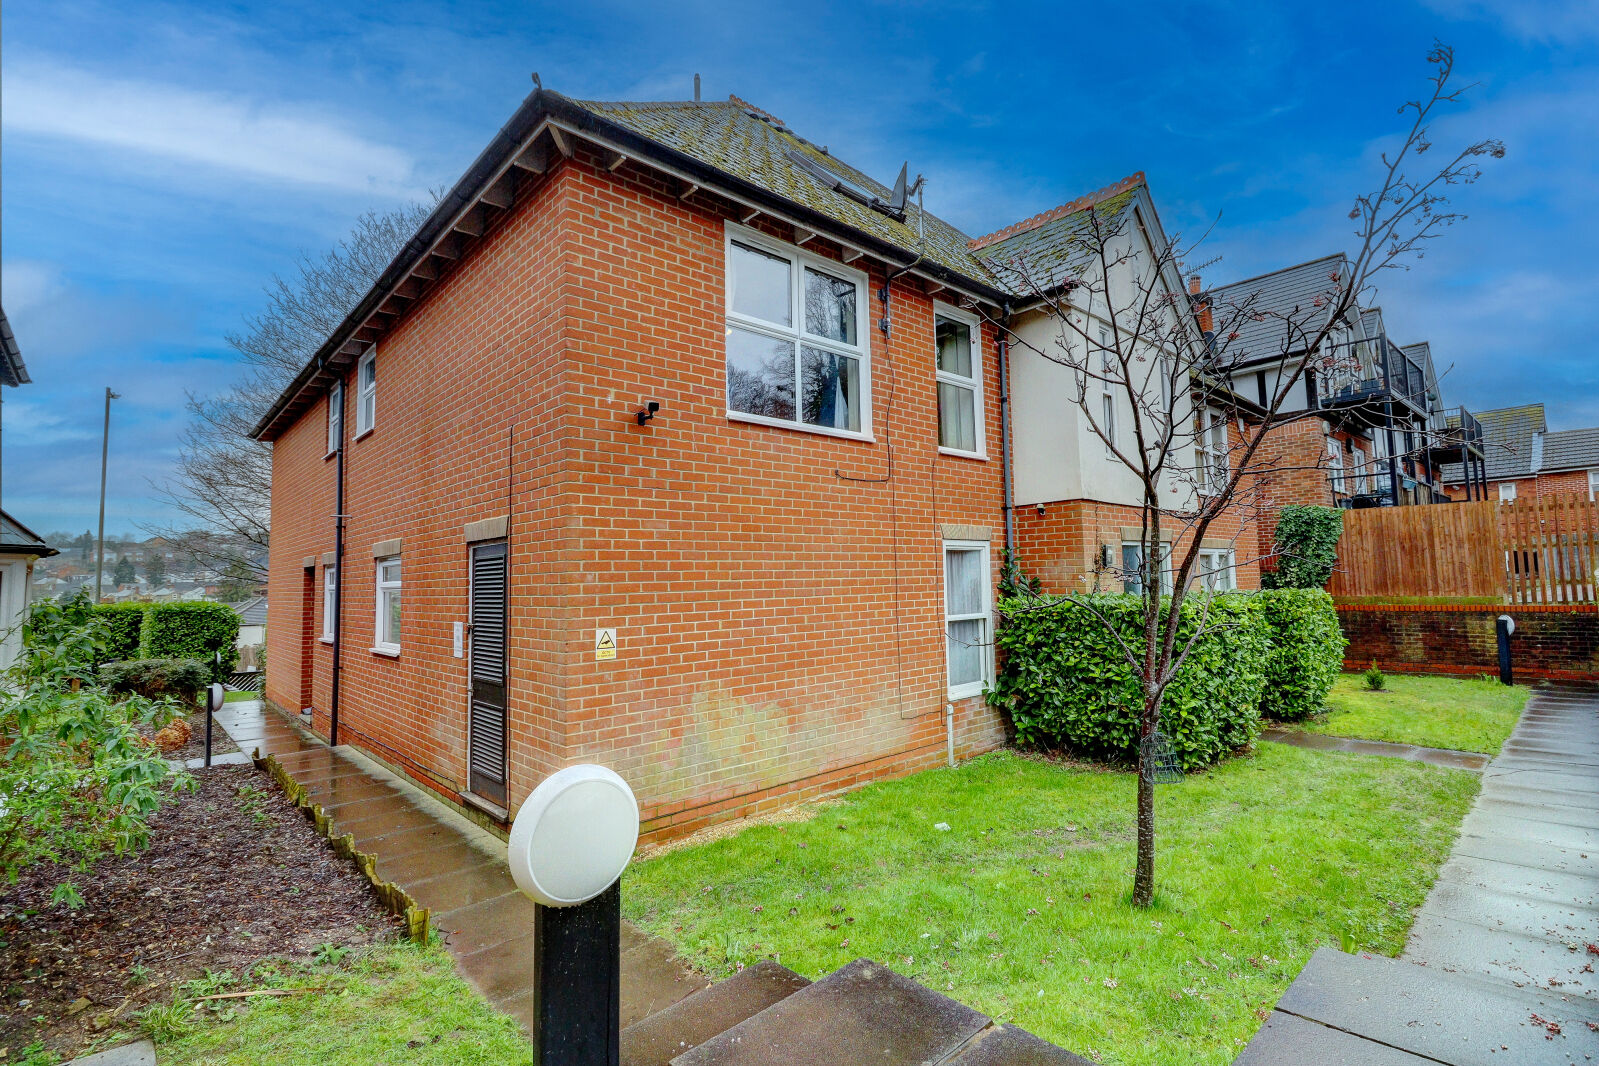 2 bedroom semi detached flat for sale Birches Rise, West Wycombe Road, HP12, main image